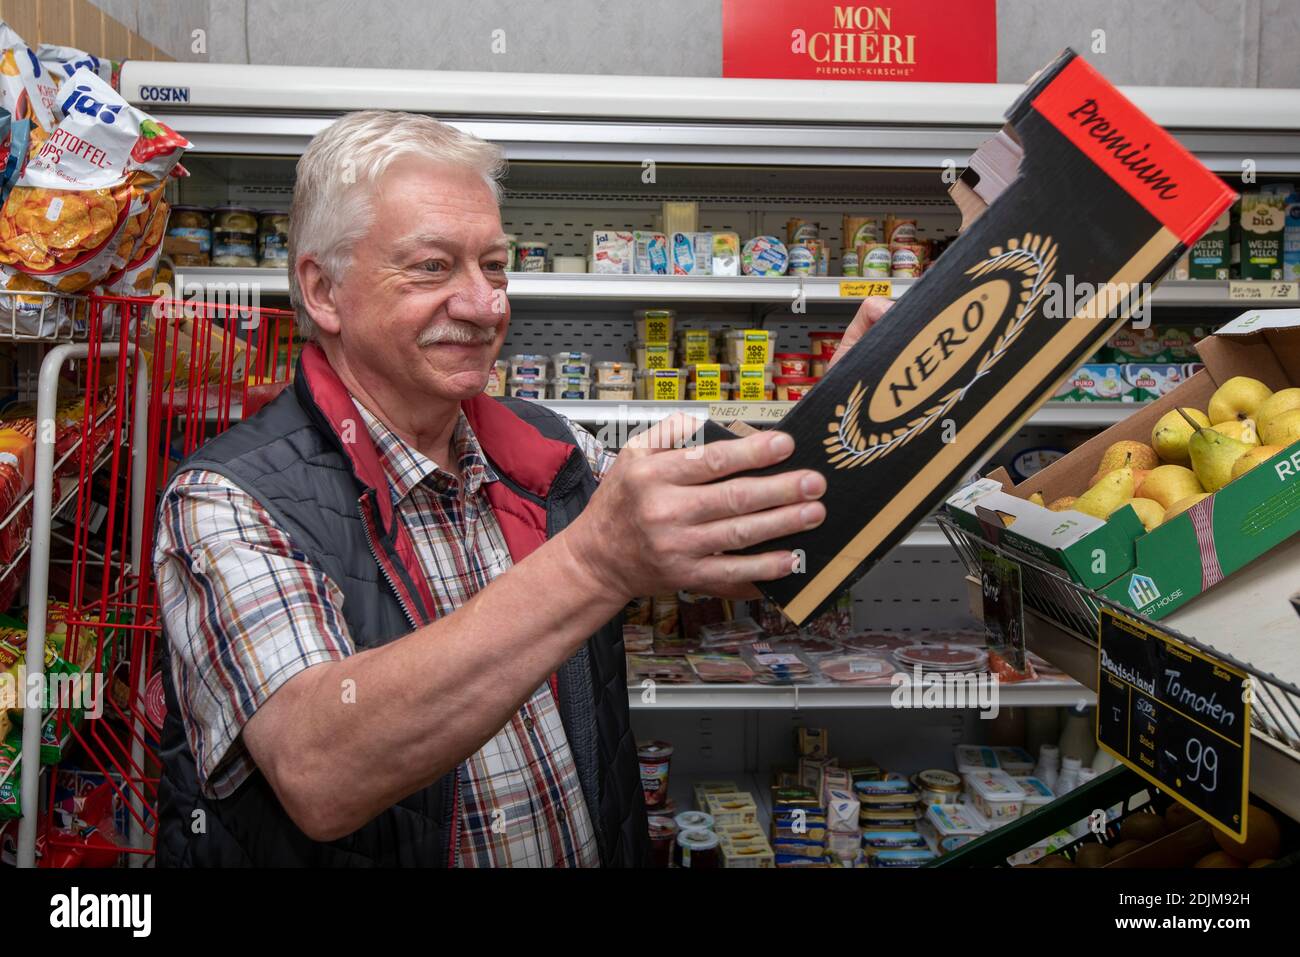 Greengrocer stands a box of tomatoes Stock Photo